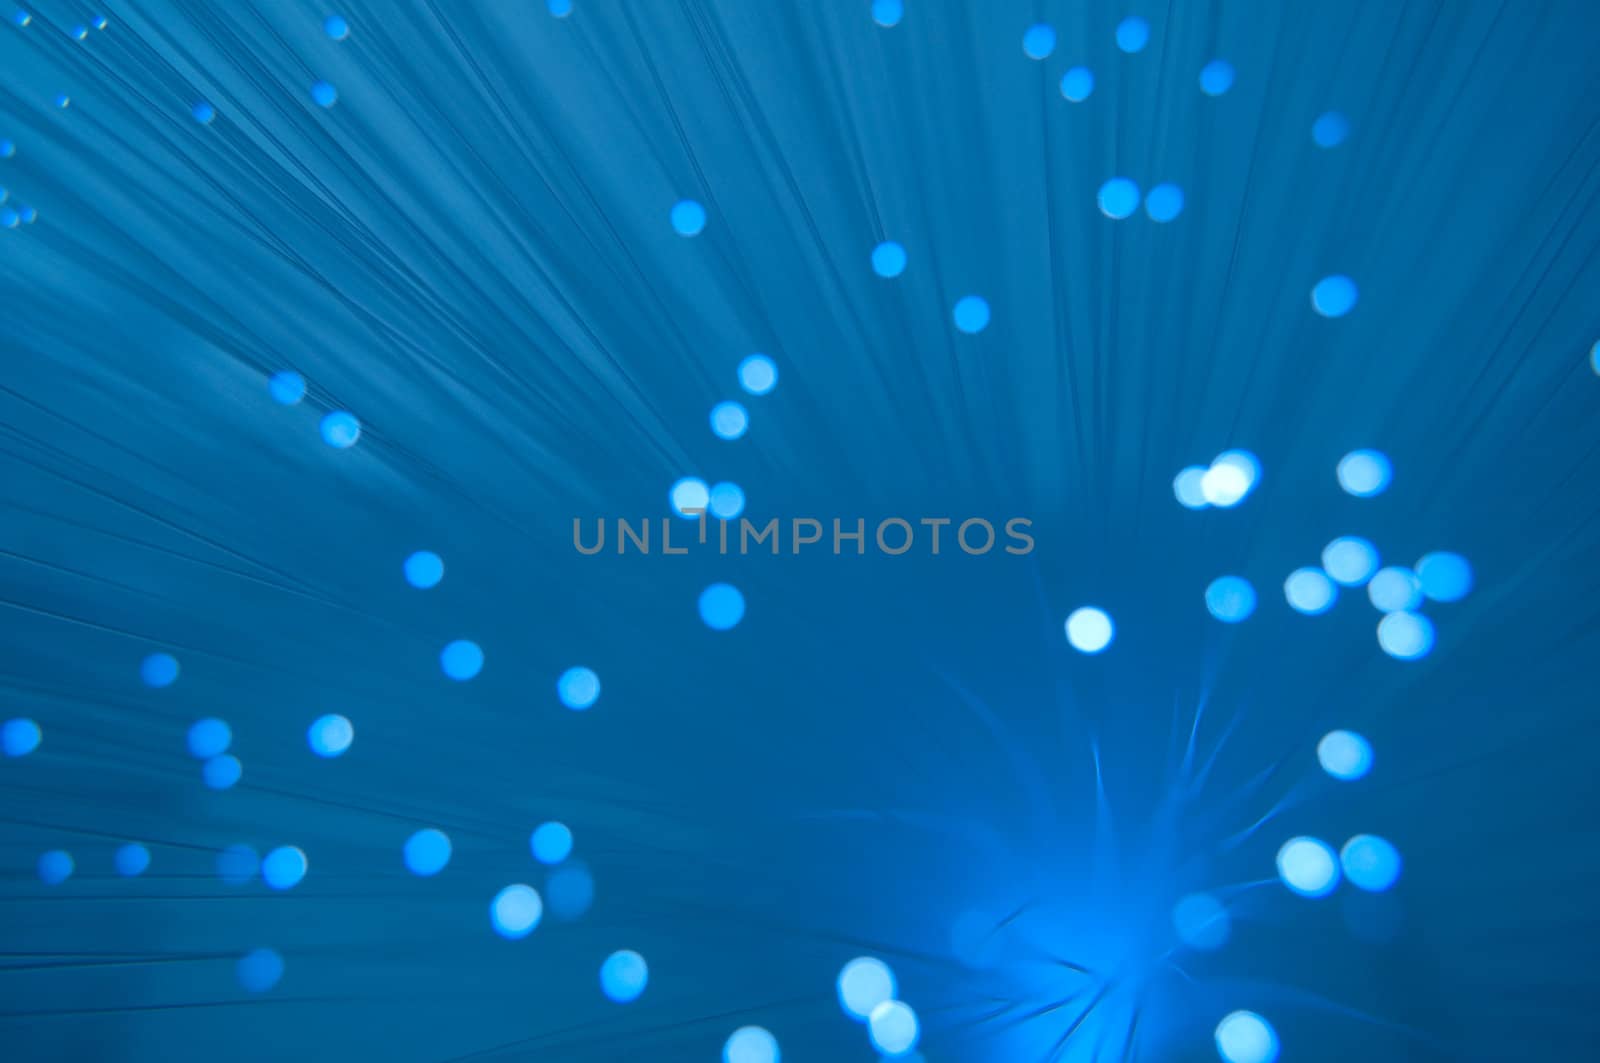 Close, abstract style and low level capturing the ends of many illuminated blue fibre optic strands.